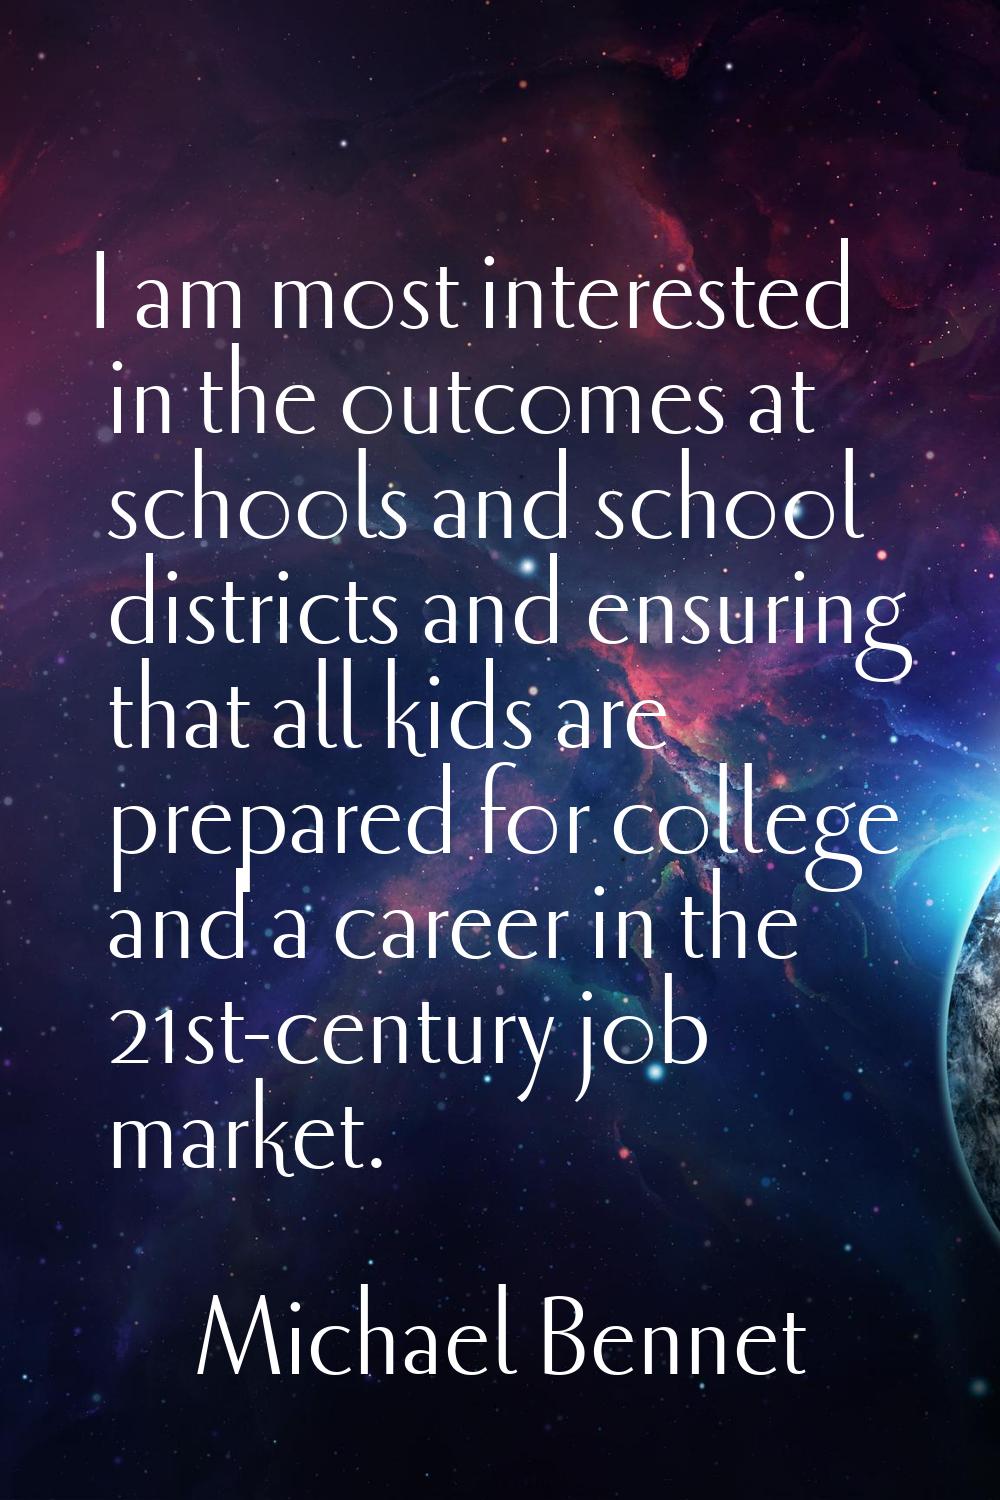 I am most interested in the outcomes at schools and school districts and ensuring that all kids are